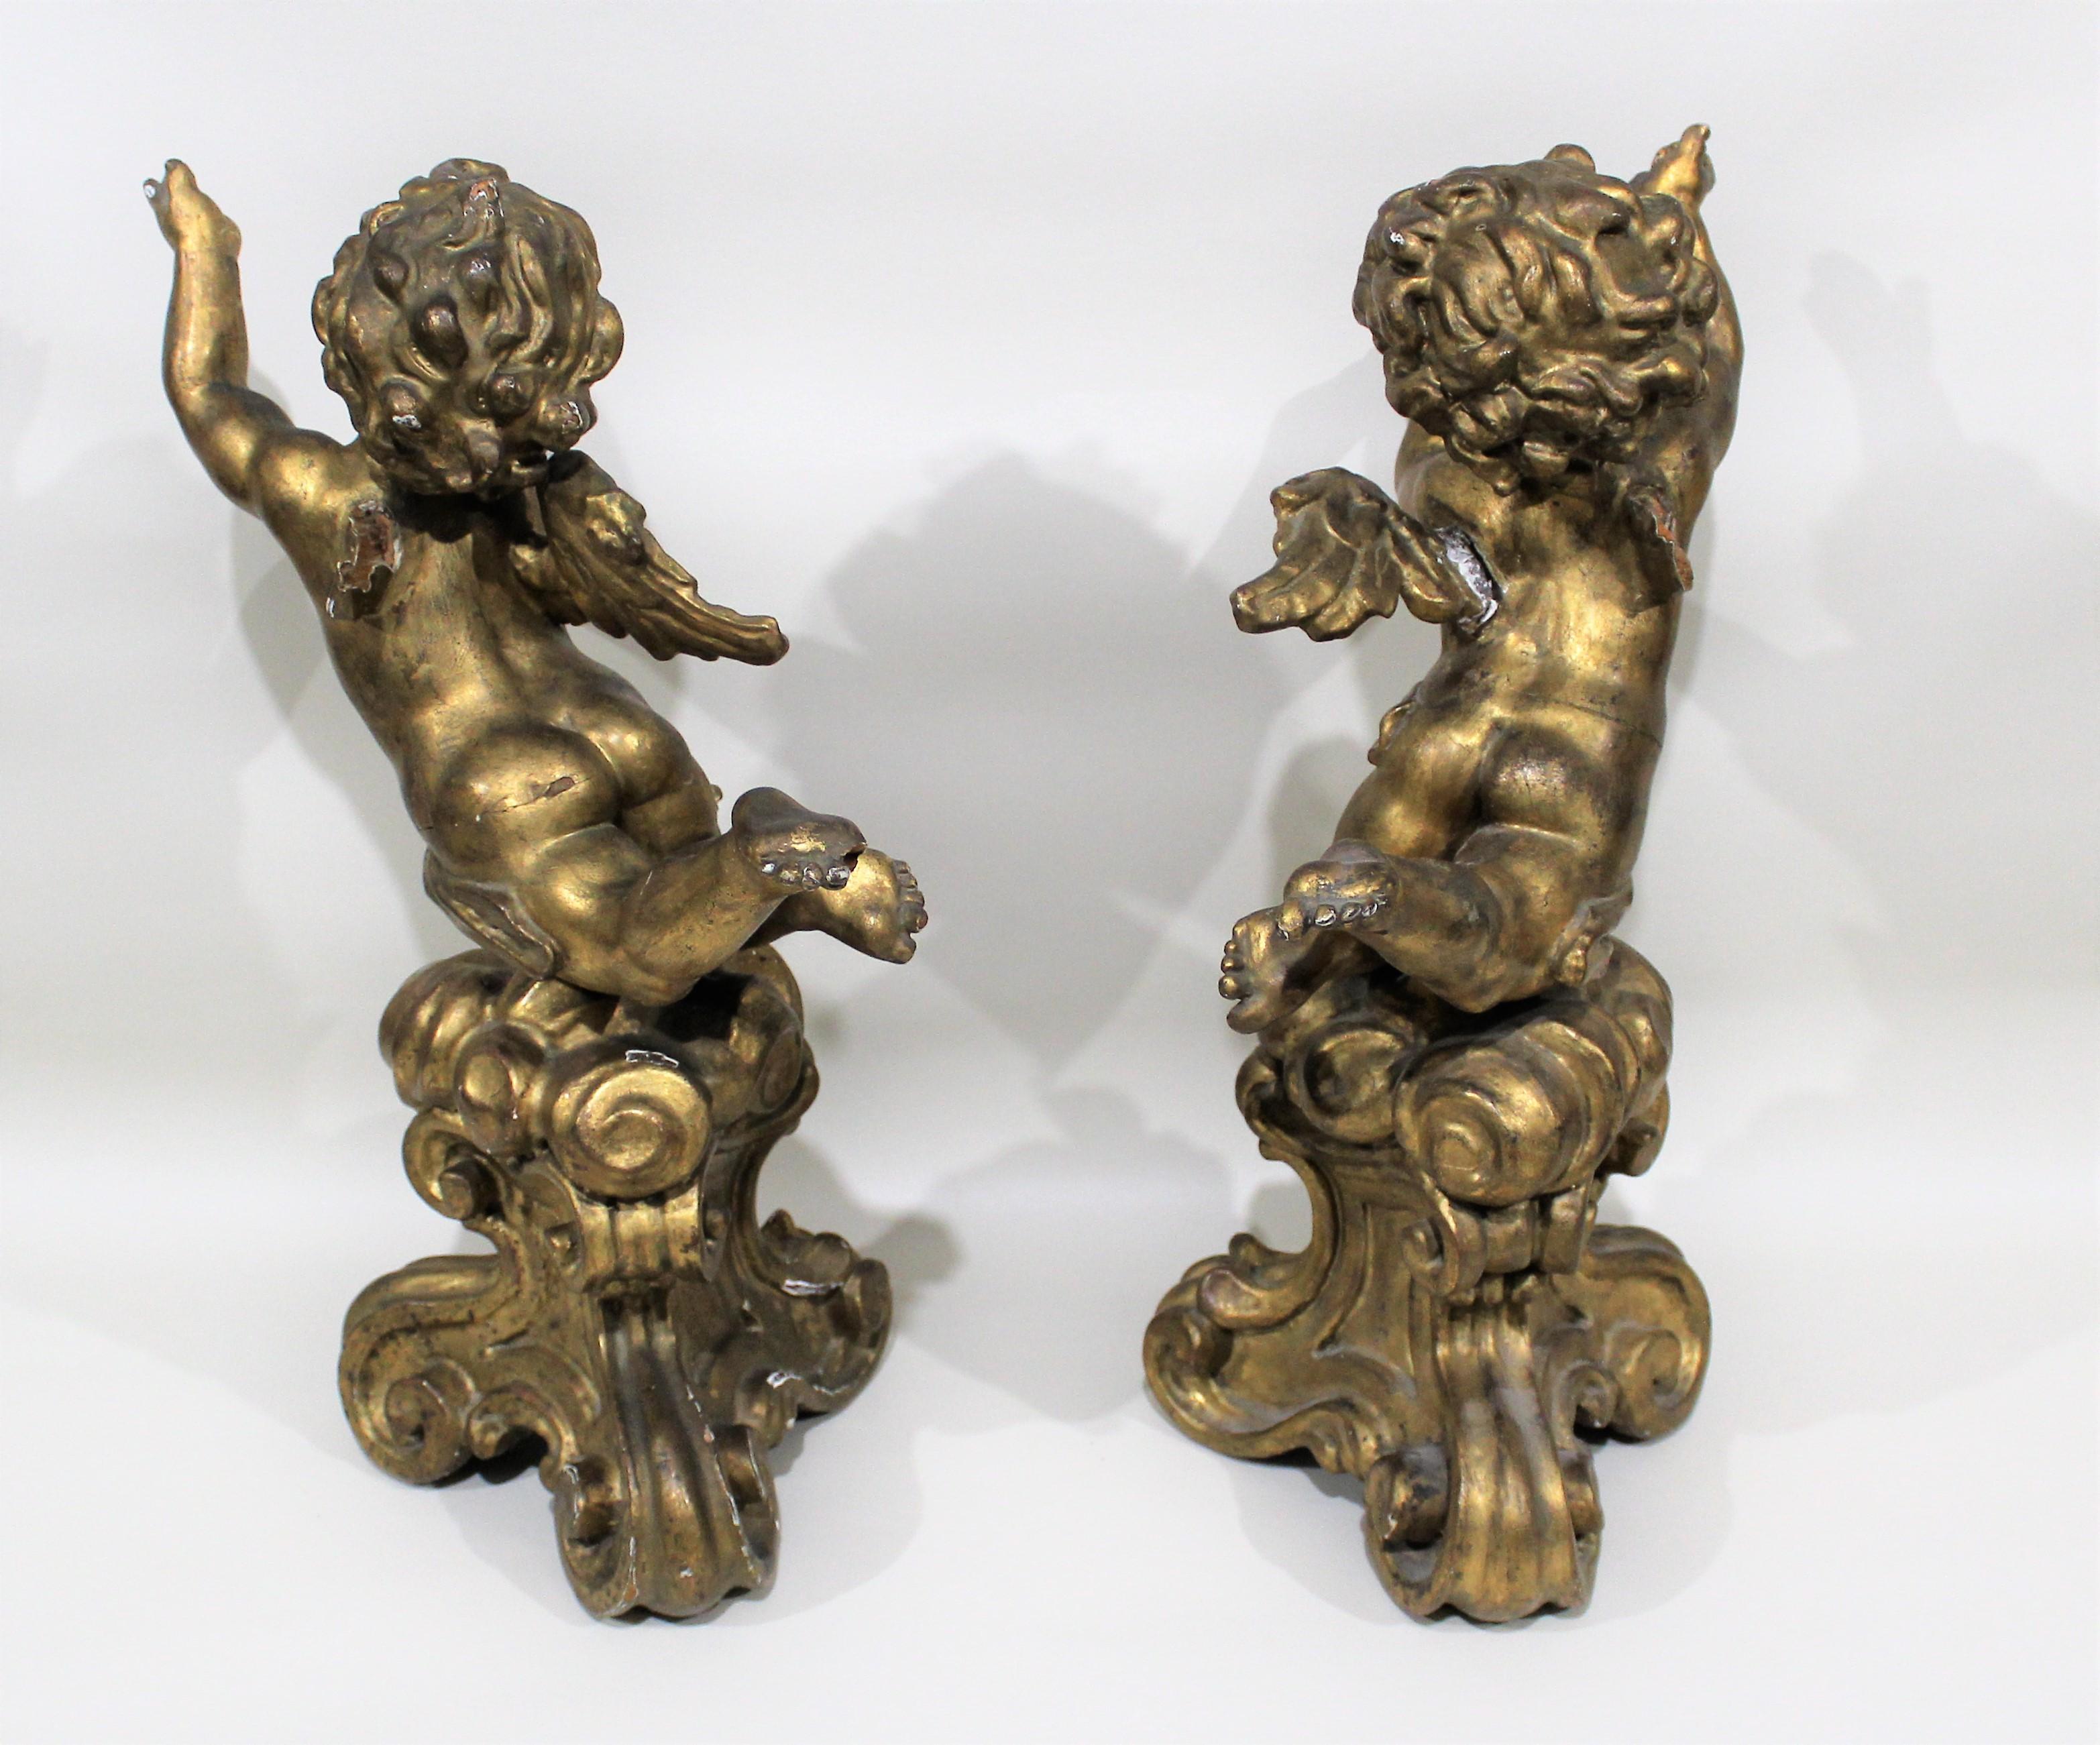 Antique Pair of Gilt Carved Wood Putti Figures 1